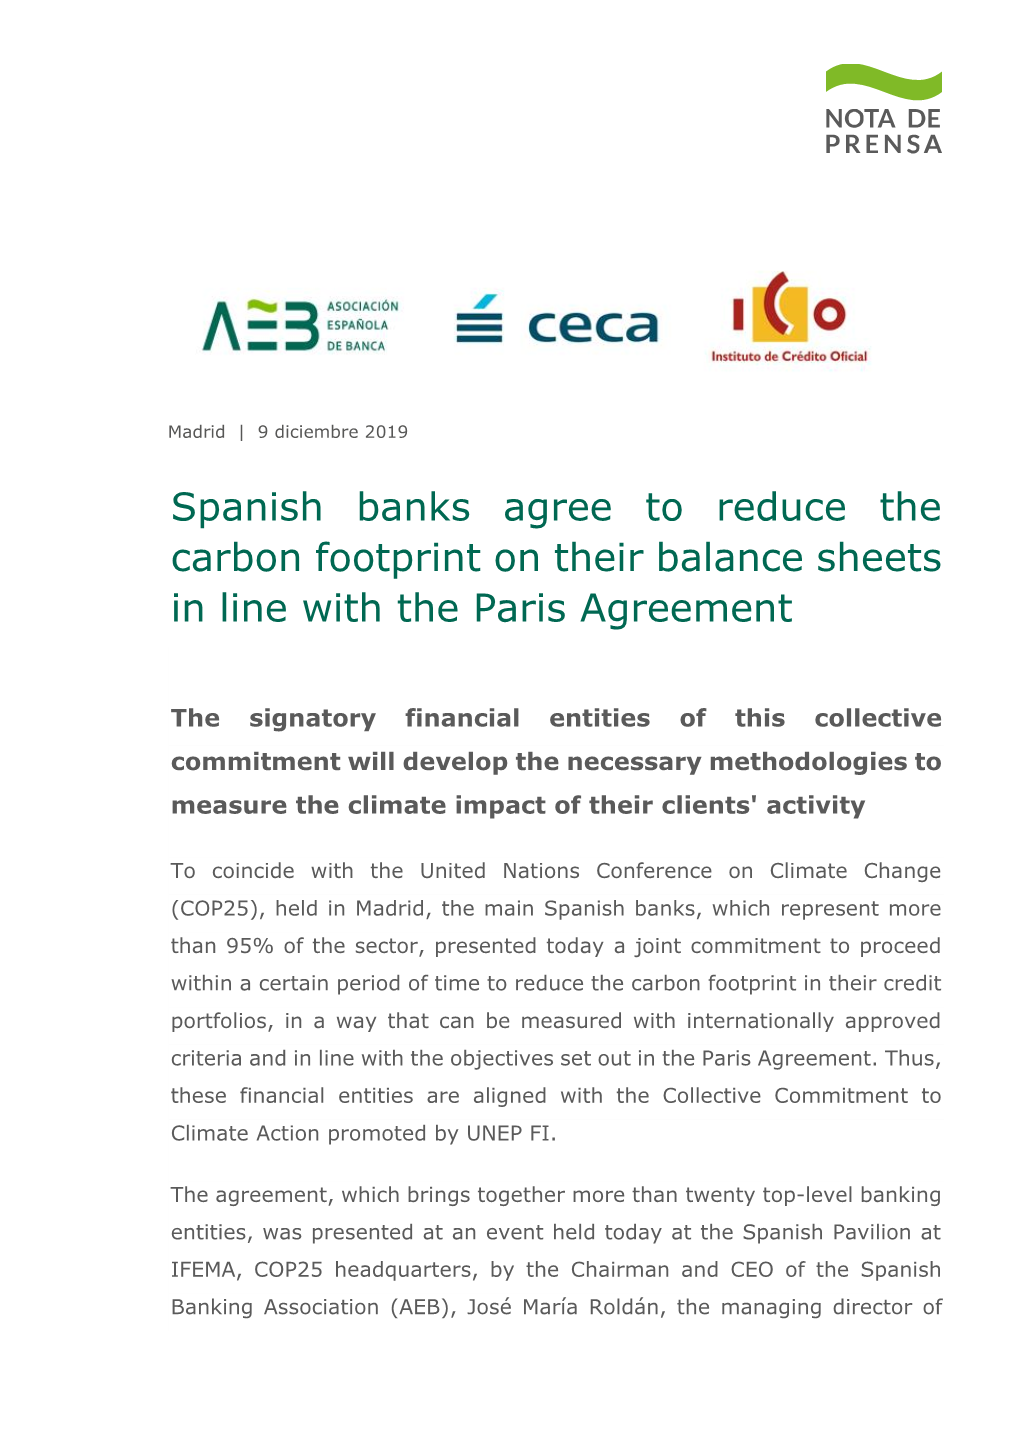 Spanish Banks Agree to Reduce the Carbon Footprint on Their Balance Sheets in Line with the Paris Agreement